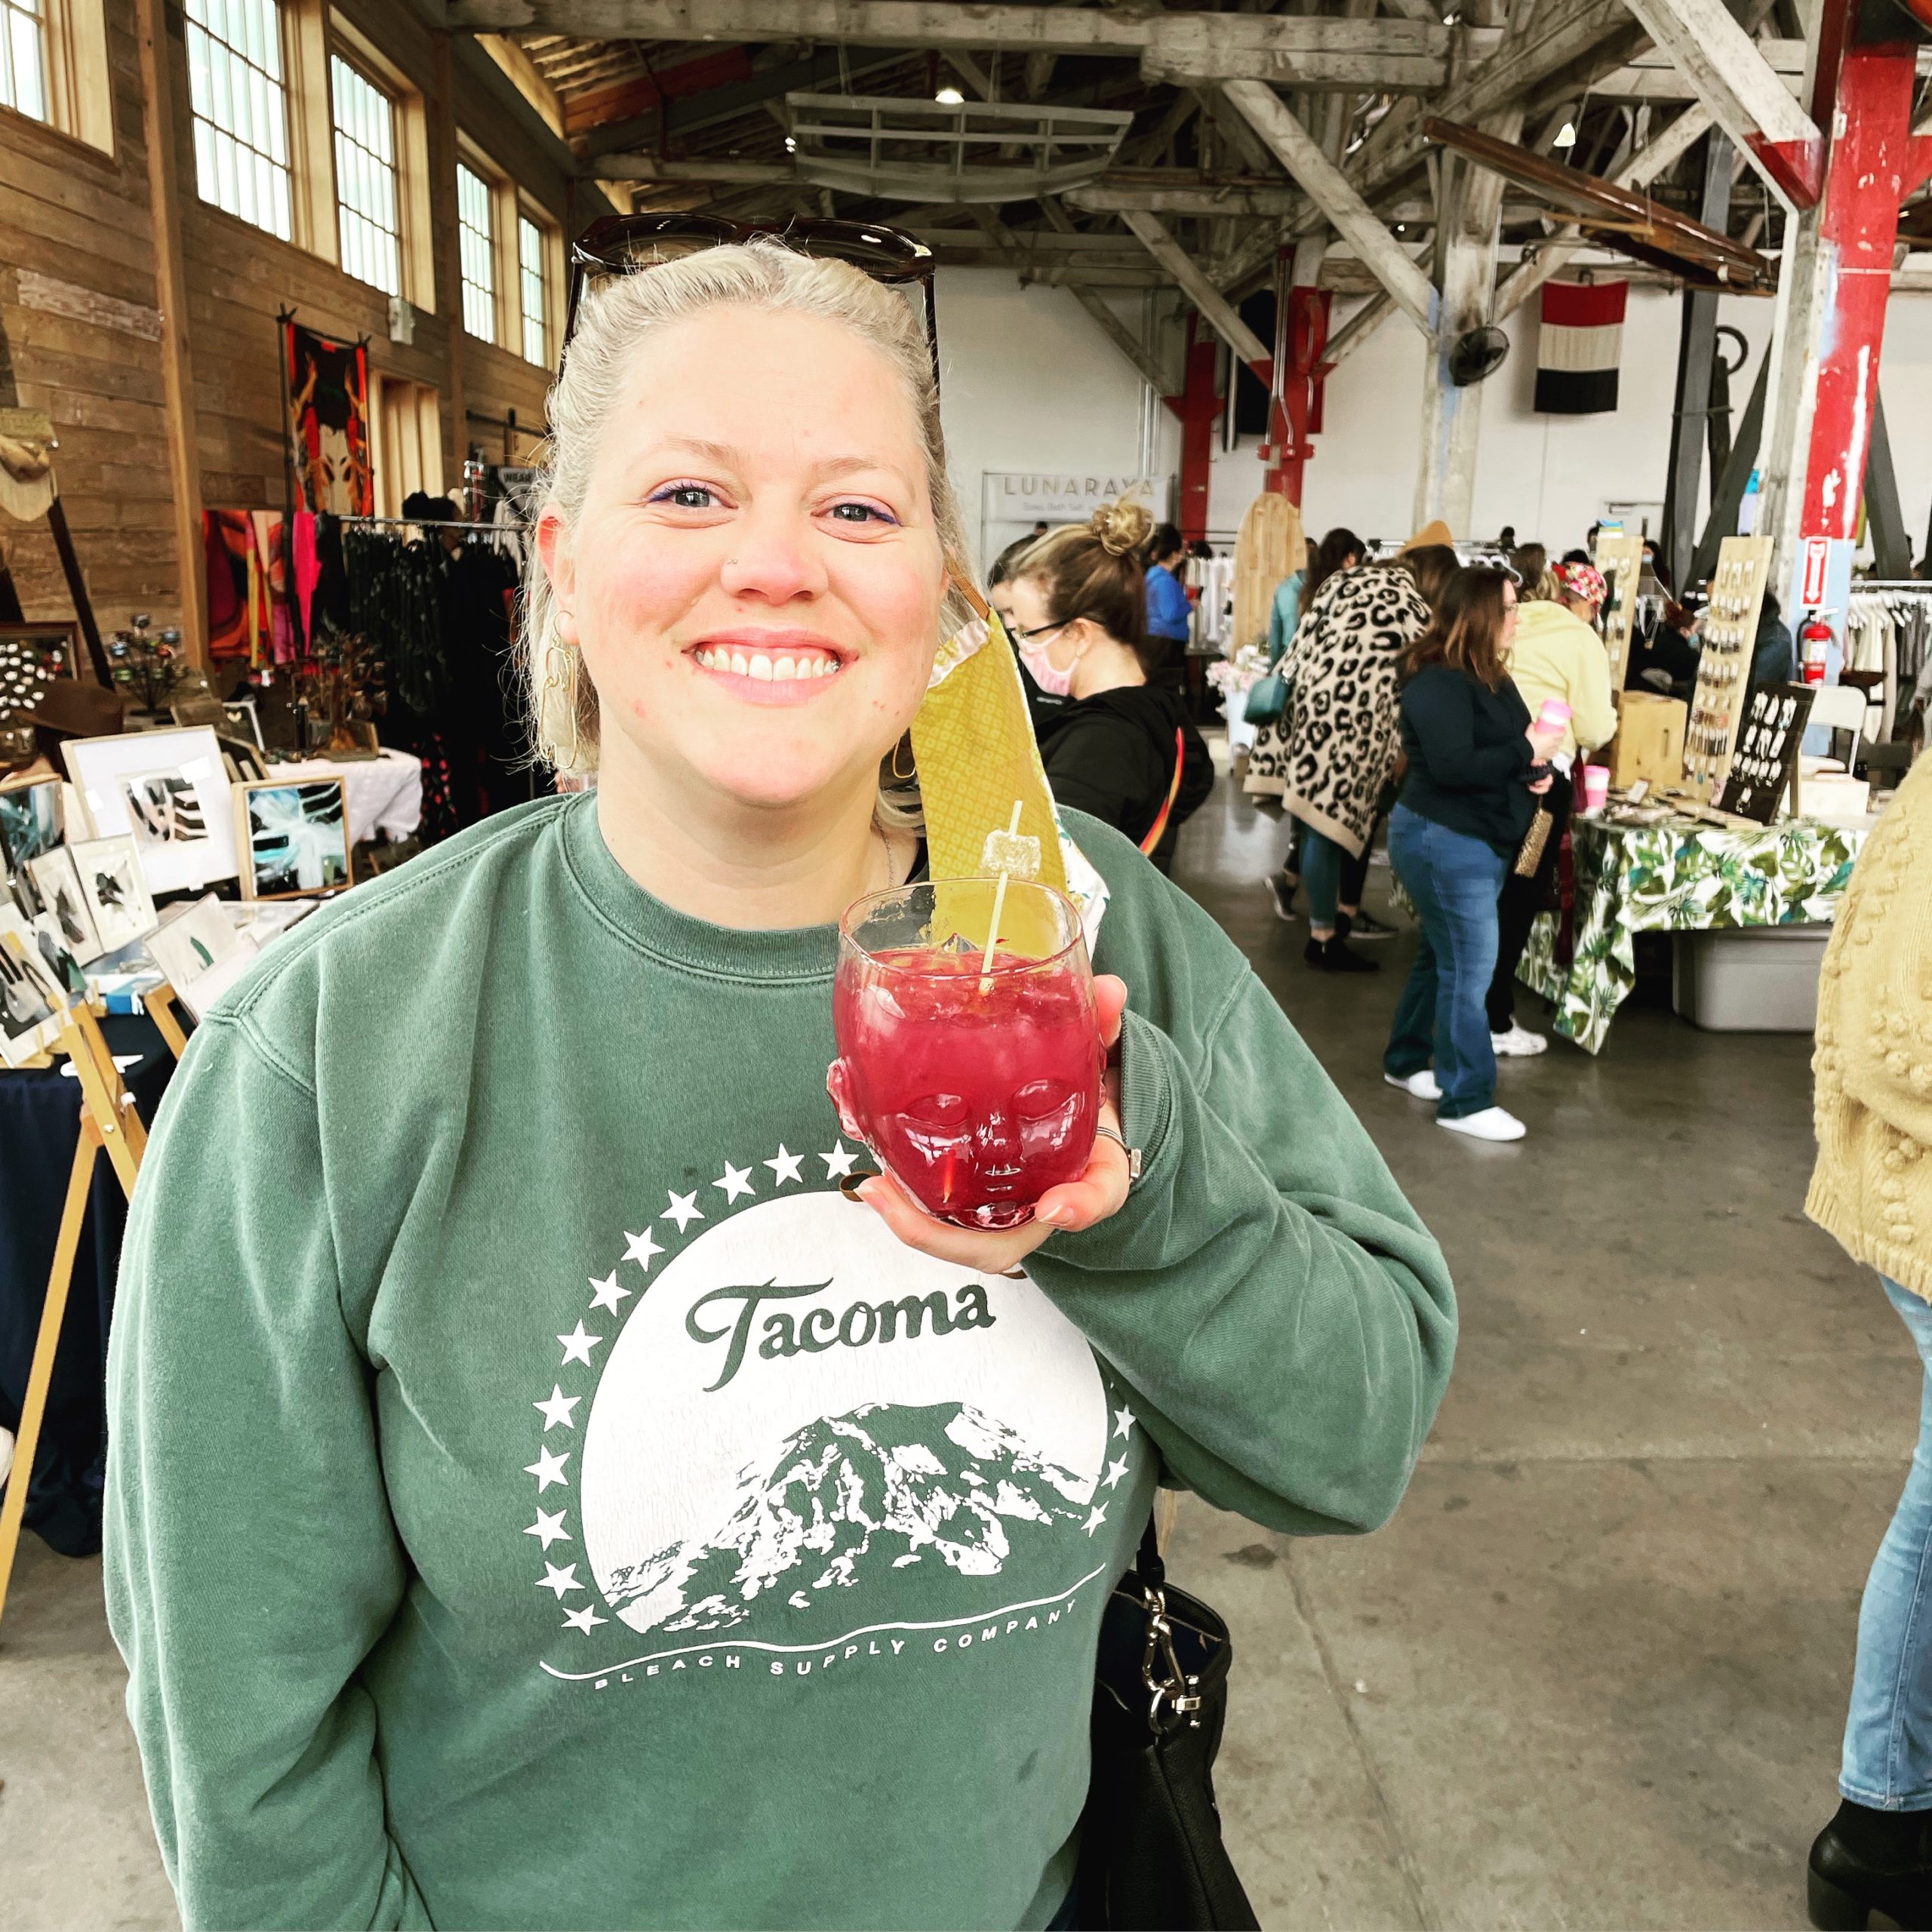 One of the best Tacoma art markets